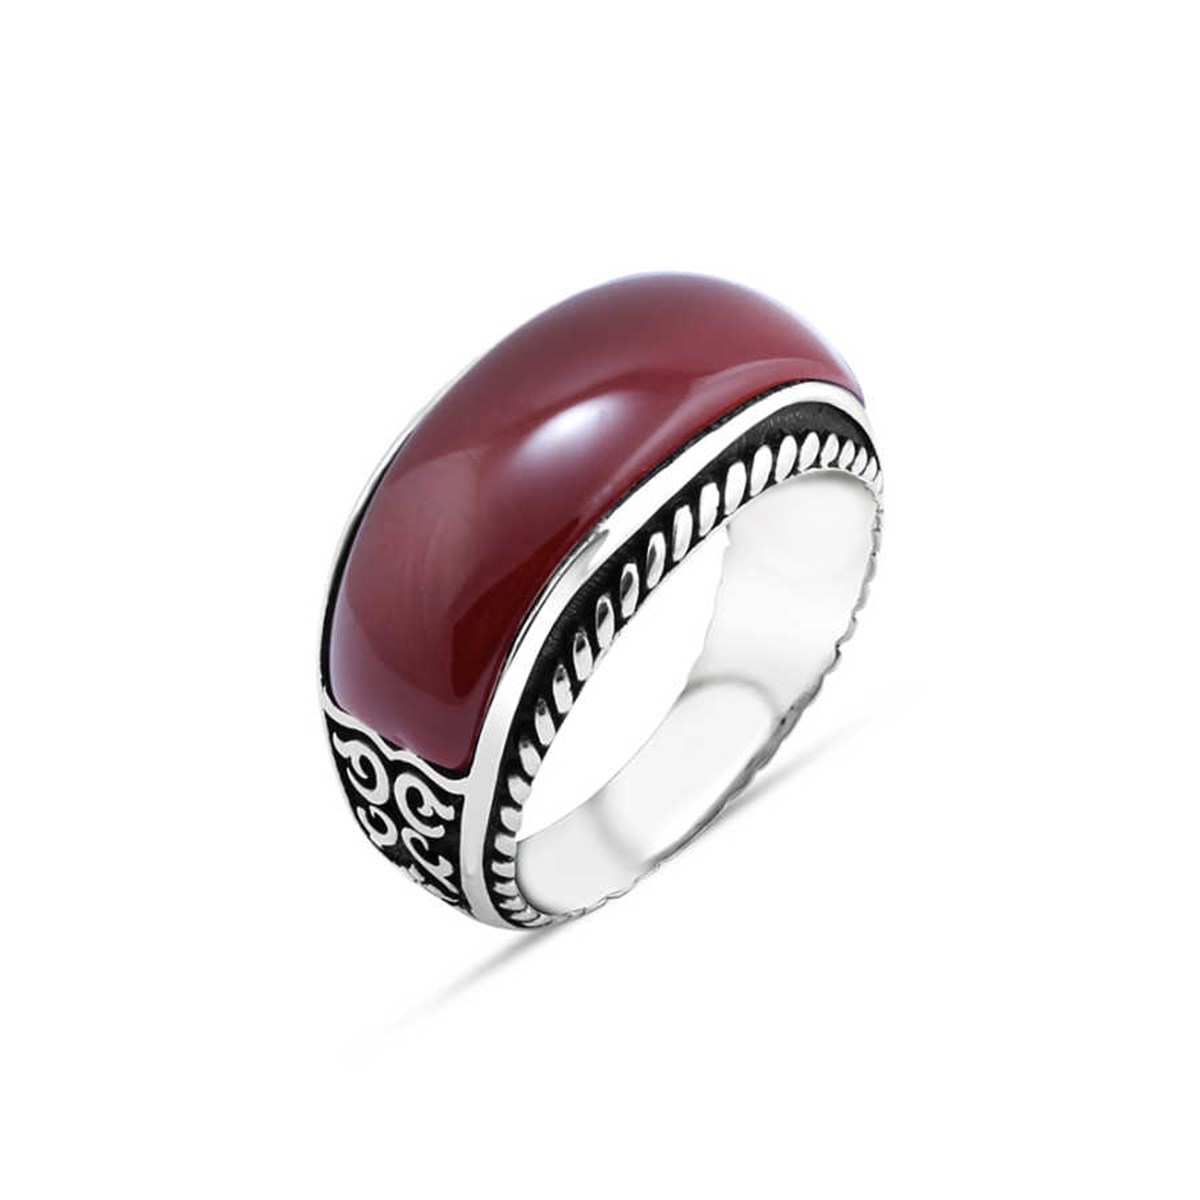 Red Agate Stone Sterling Silver Men's Ring